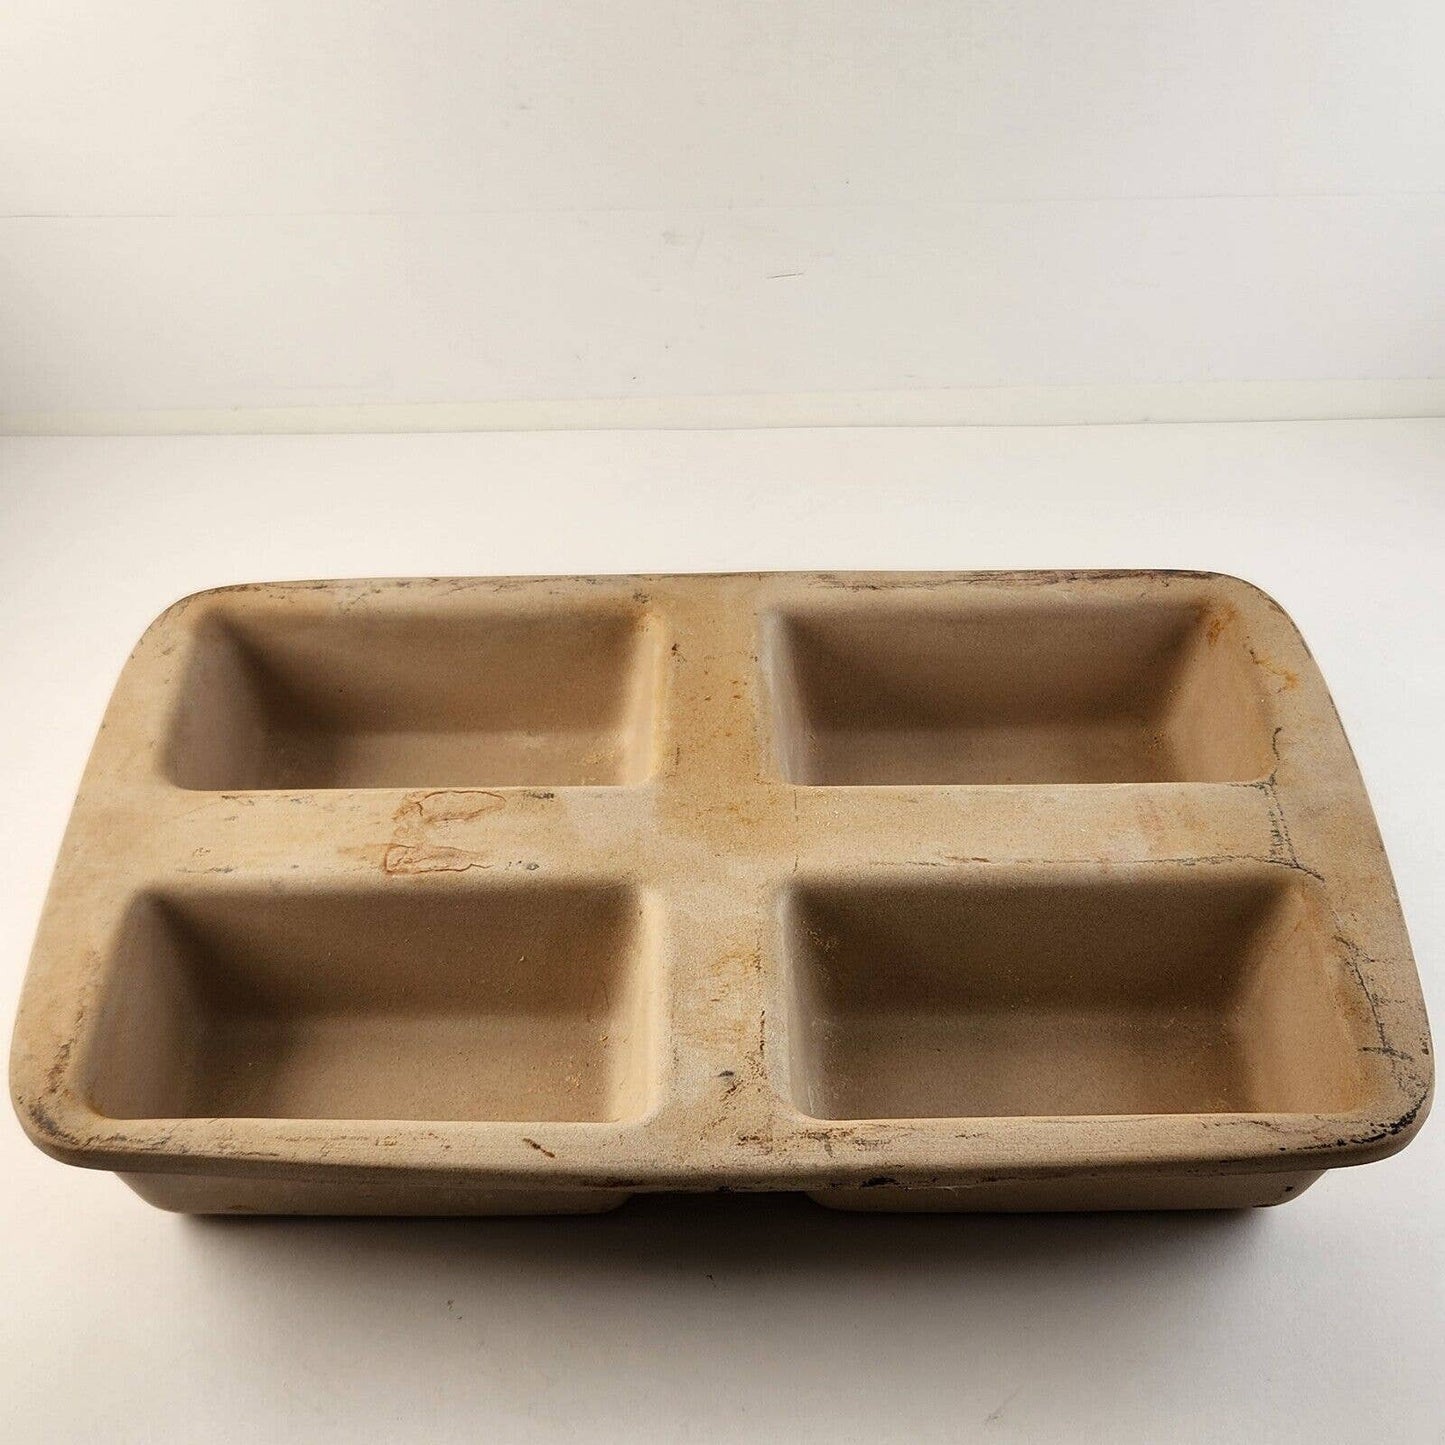  Pampered Chef Stoneware Mini Loaf Pan: Home & Kitchen